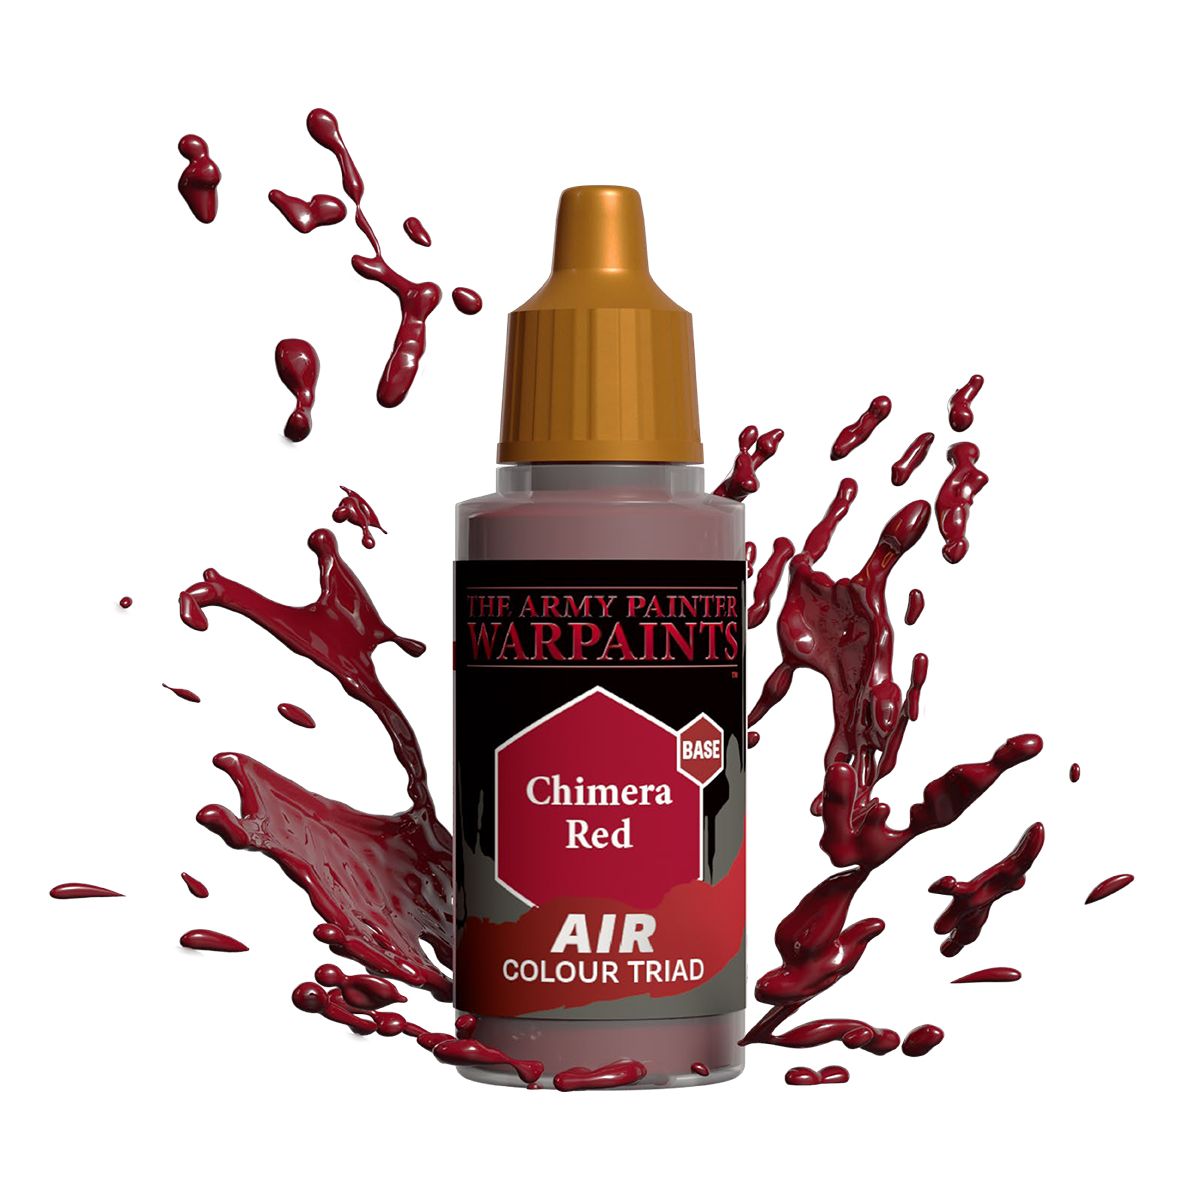 Army Painter Warpaints - Air Chimera Red Acrylic Paint 18ml